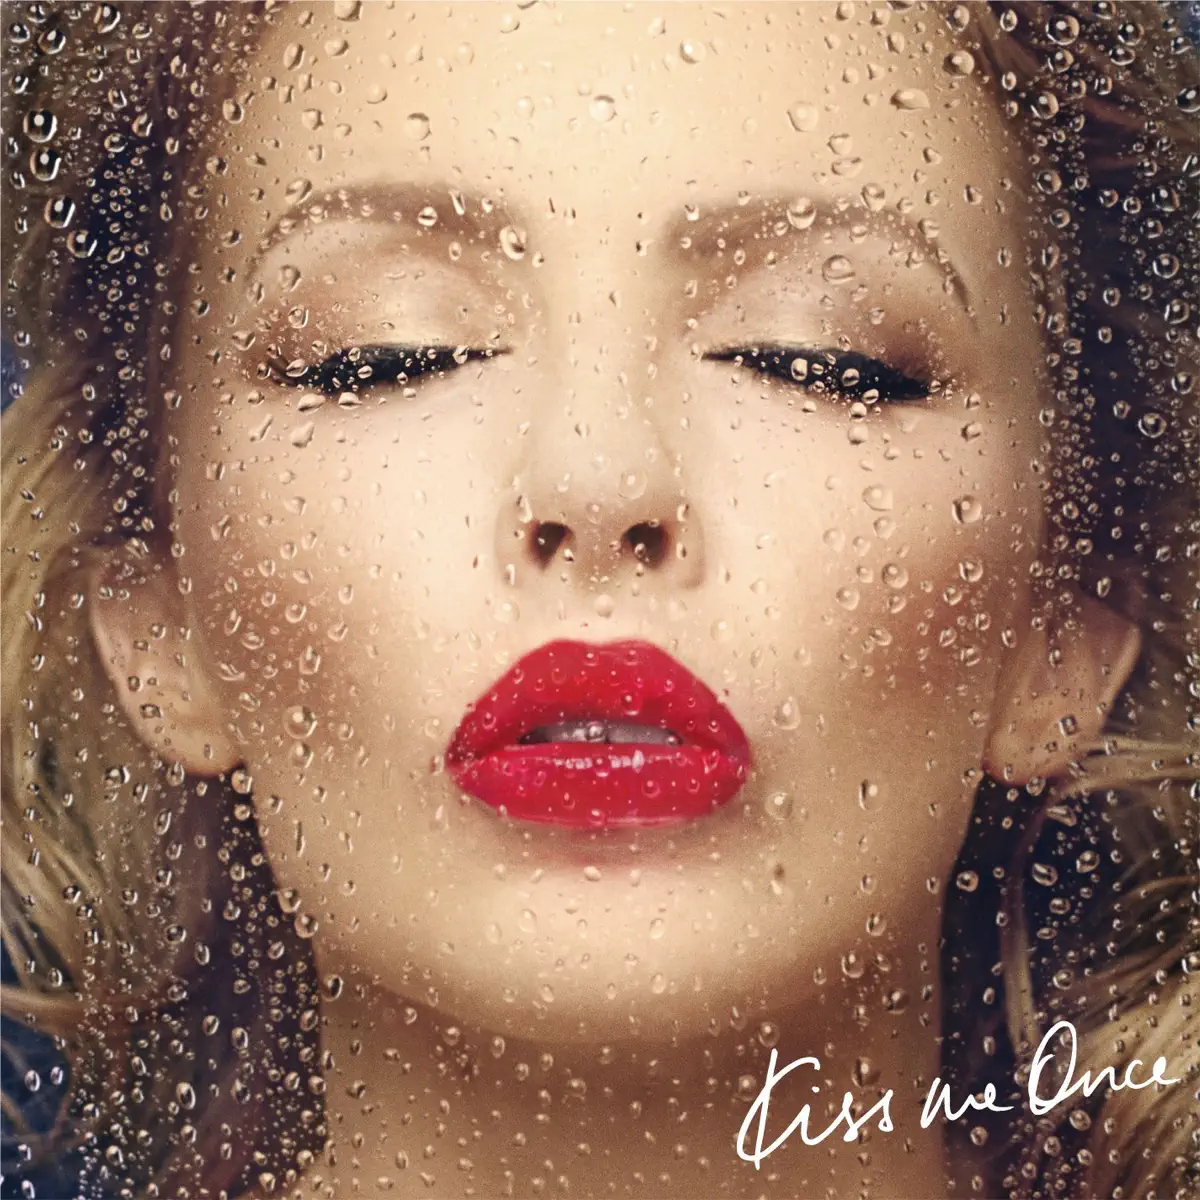 Kylie Minogue - Kiss Me Once (iTunes Festival Deluxe Edition) [Apple Digital Master] (2012) [iTunes Plus AAC M4A]-新房子